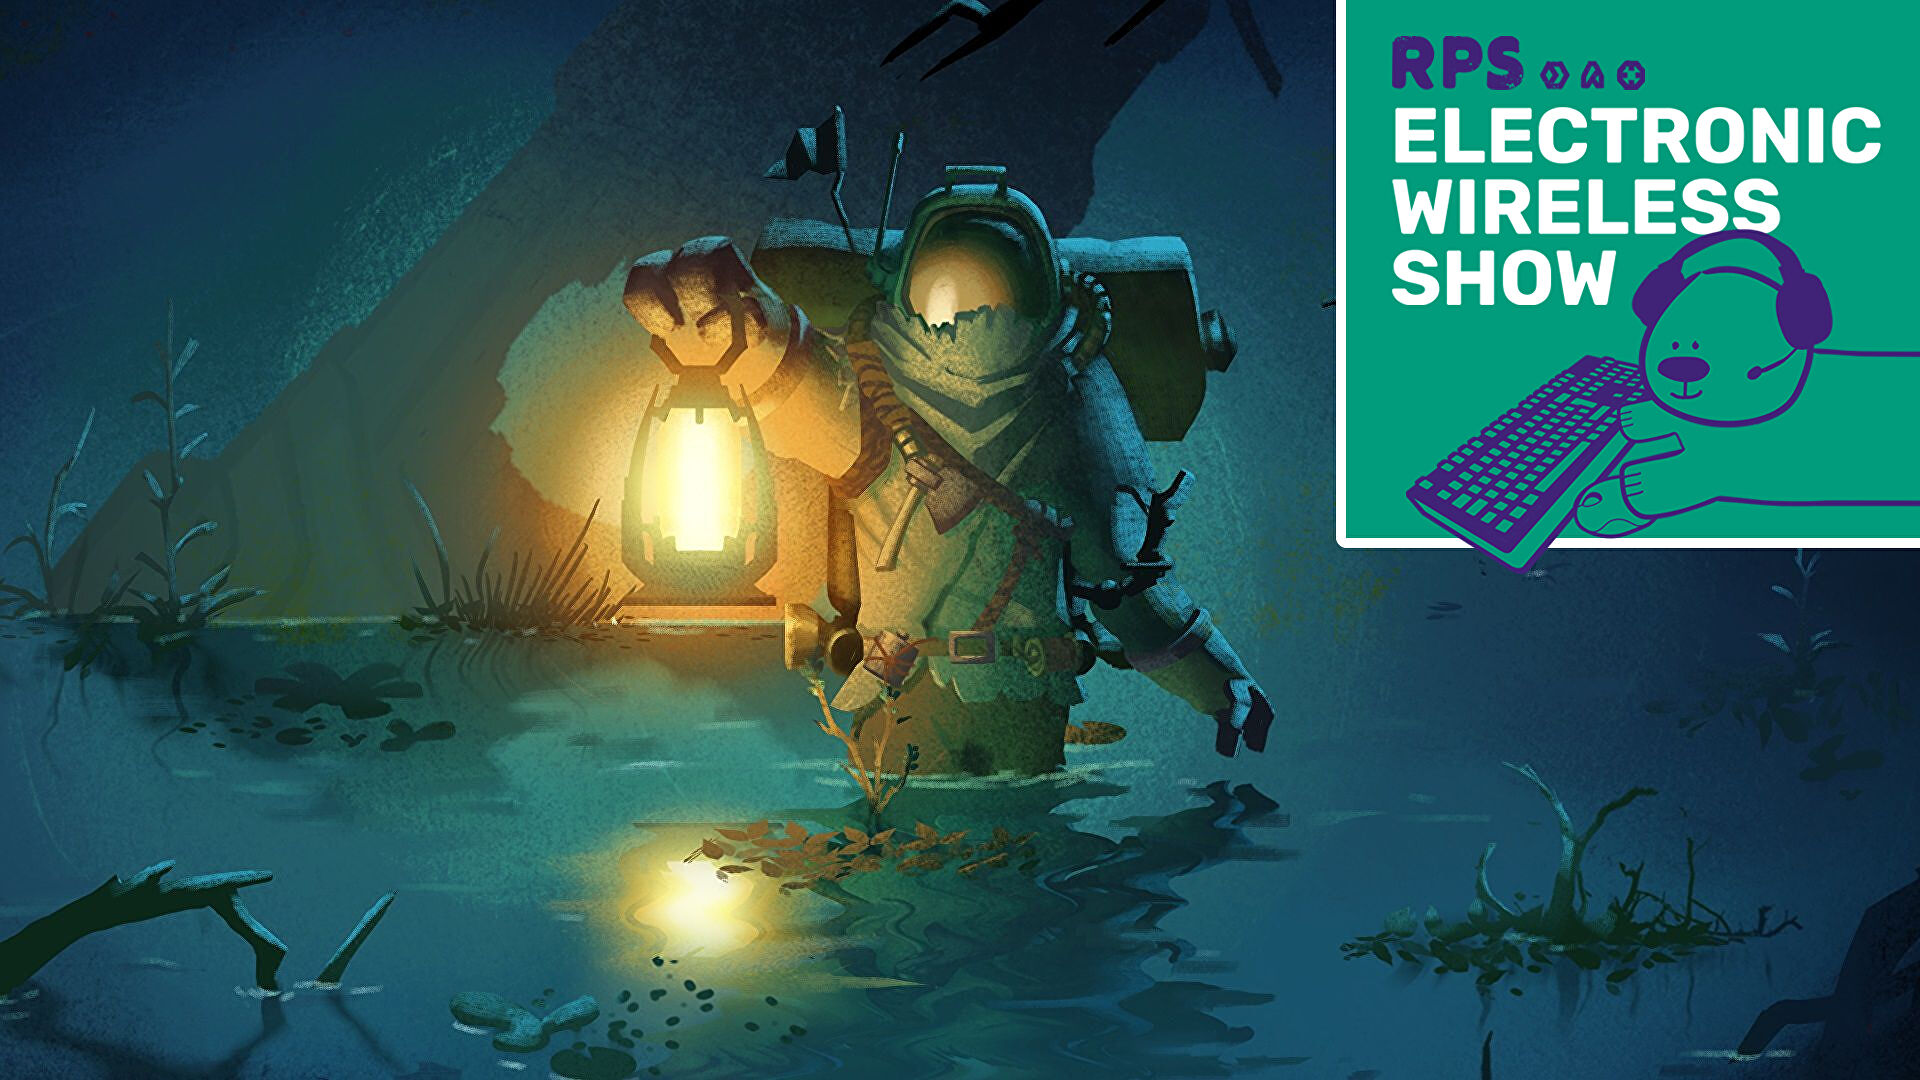 The Electronic Wireless Show episode 209: the best fantasy video game dinner party special